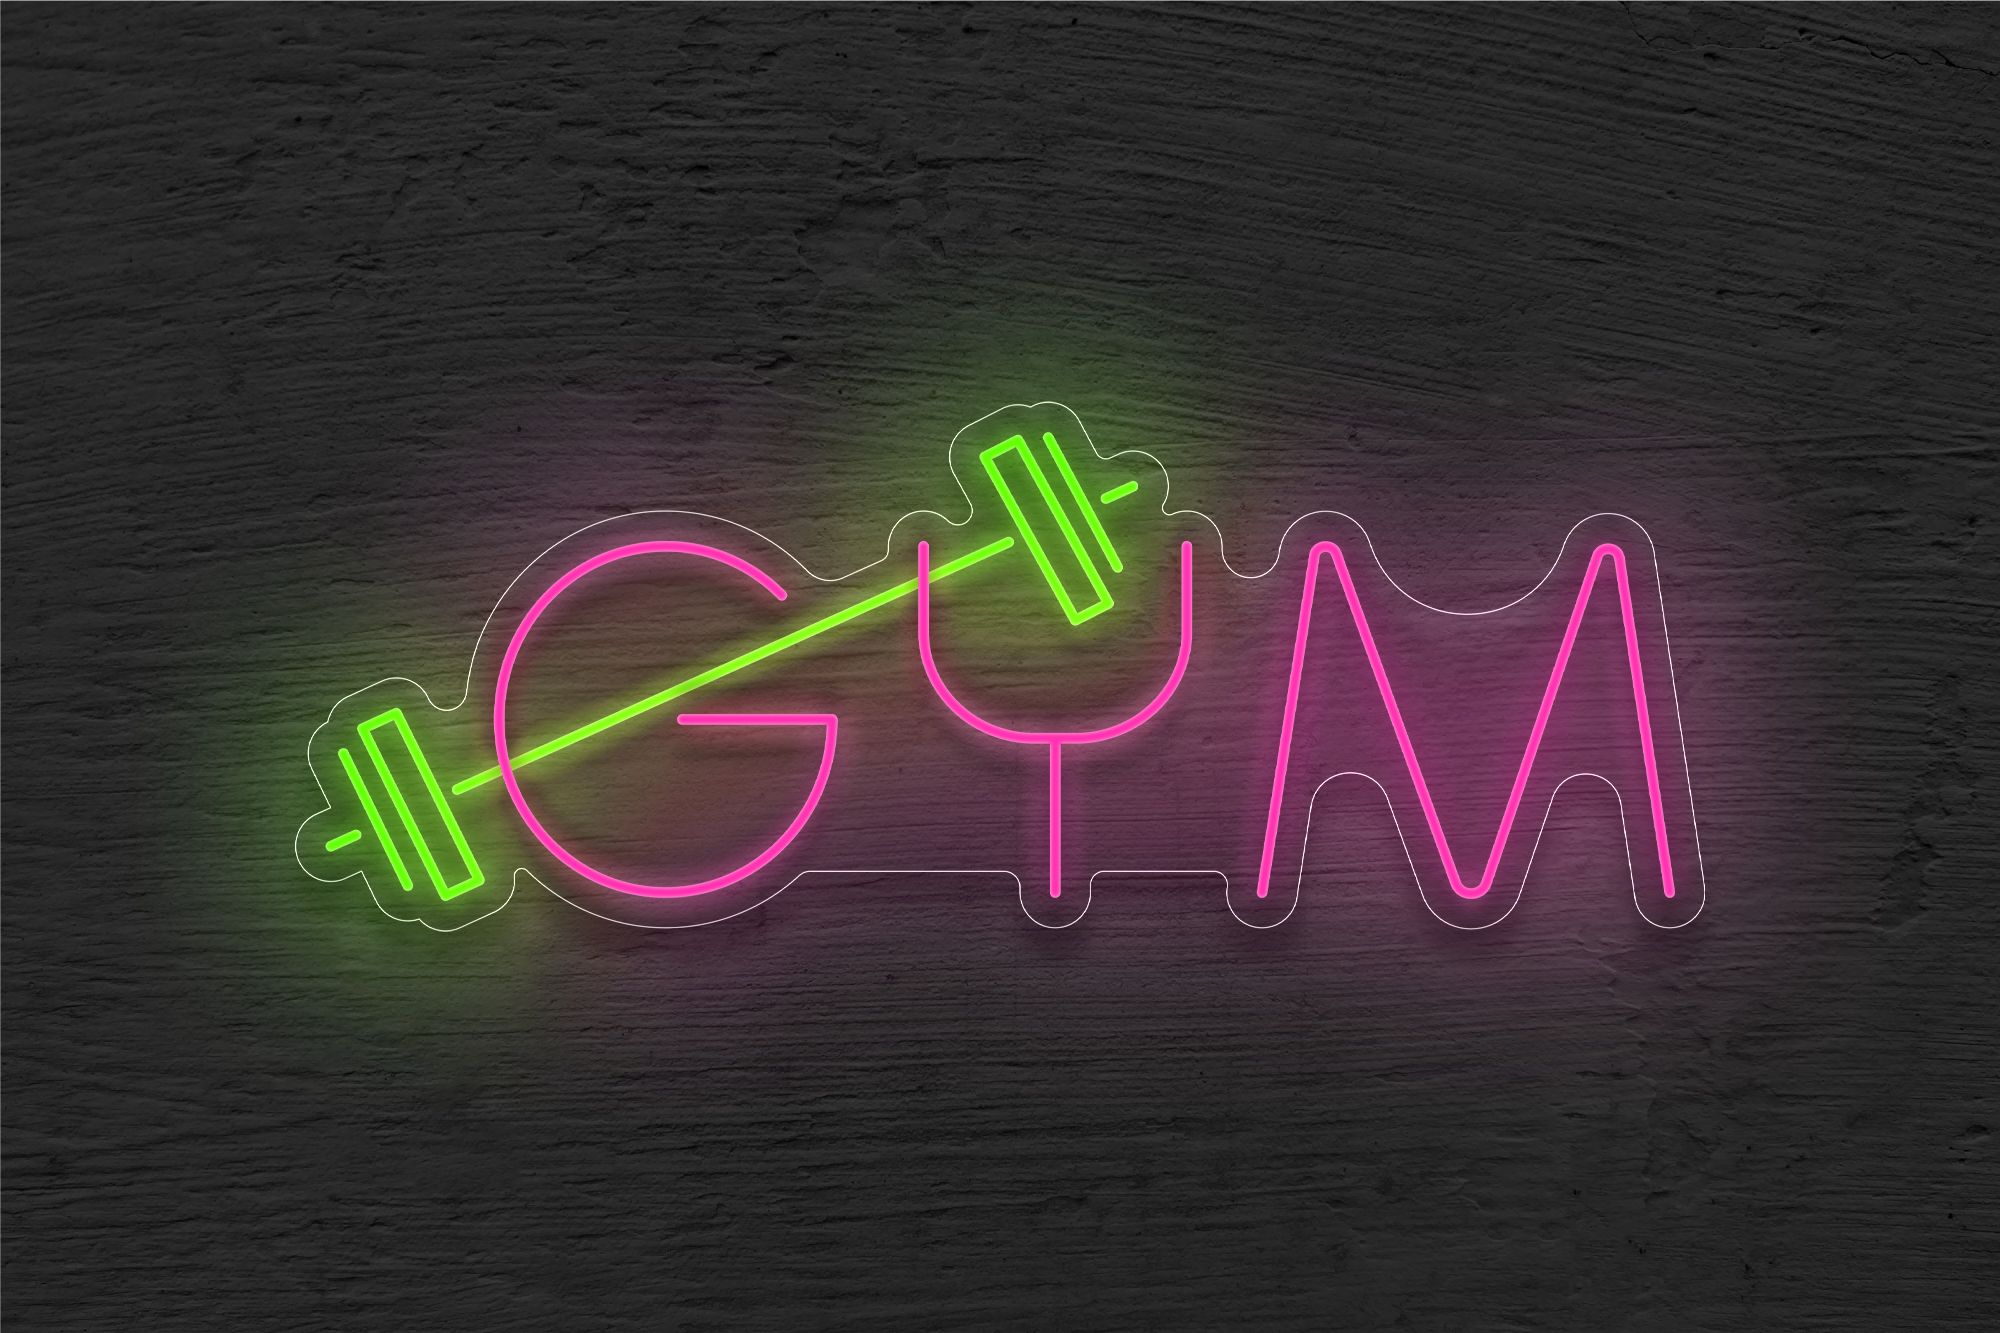 "GYM" with Barbell LED Neon Sign